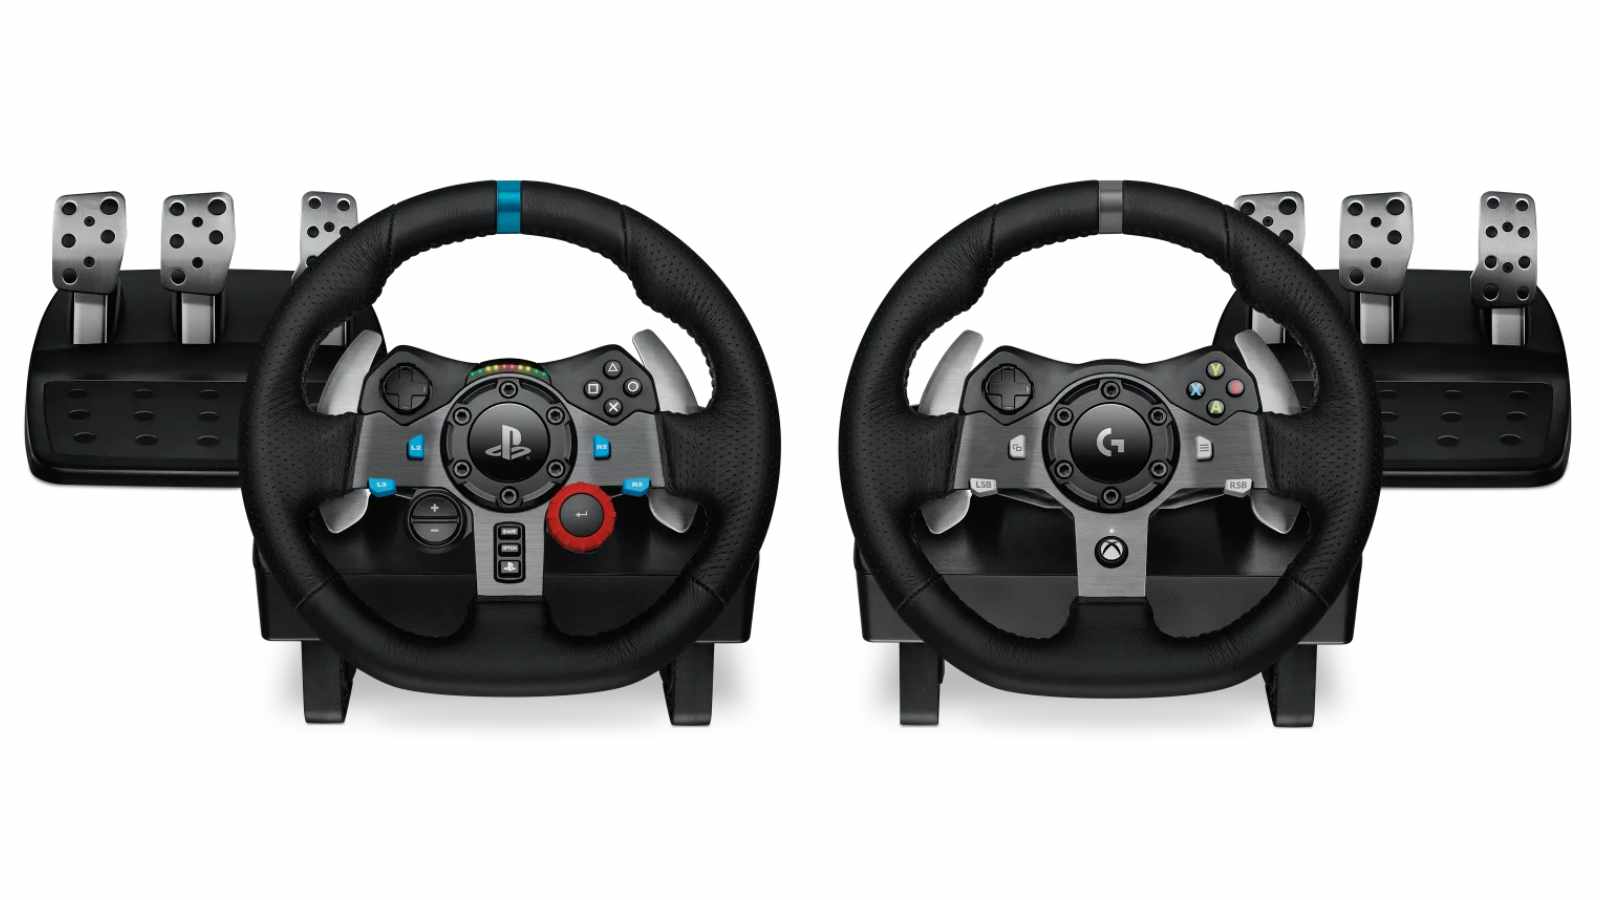 Logitech G29 to the left and Logitech G920 to the right against a white background.